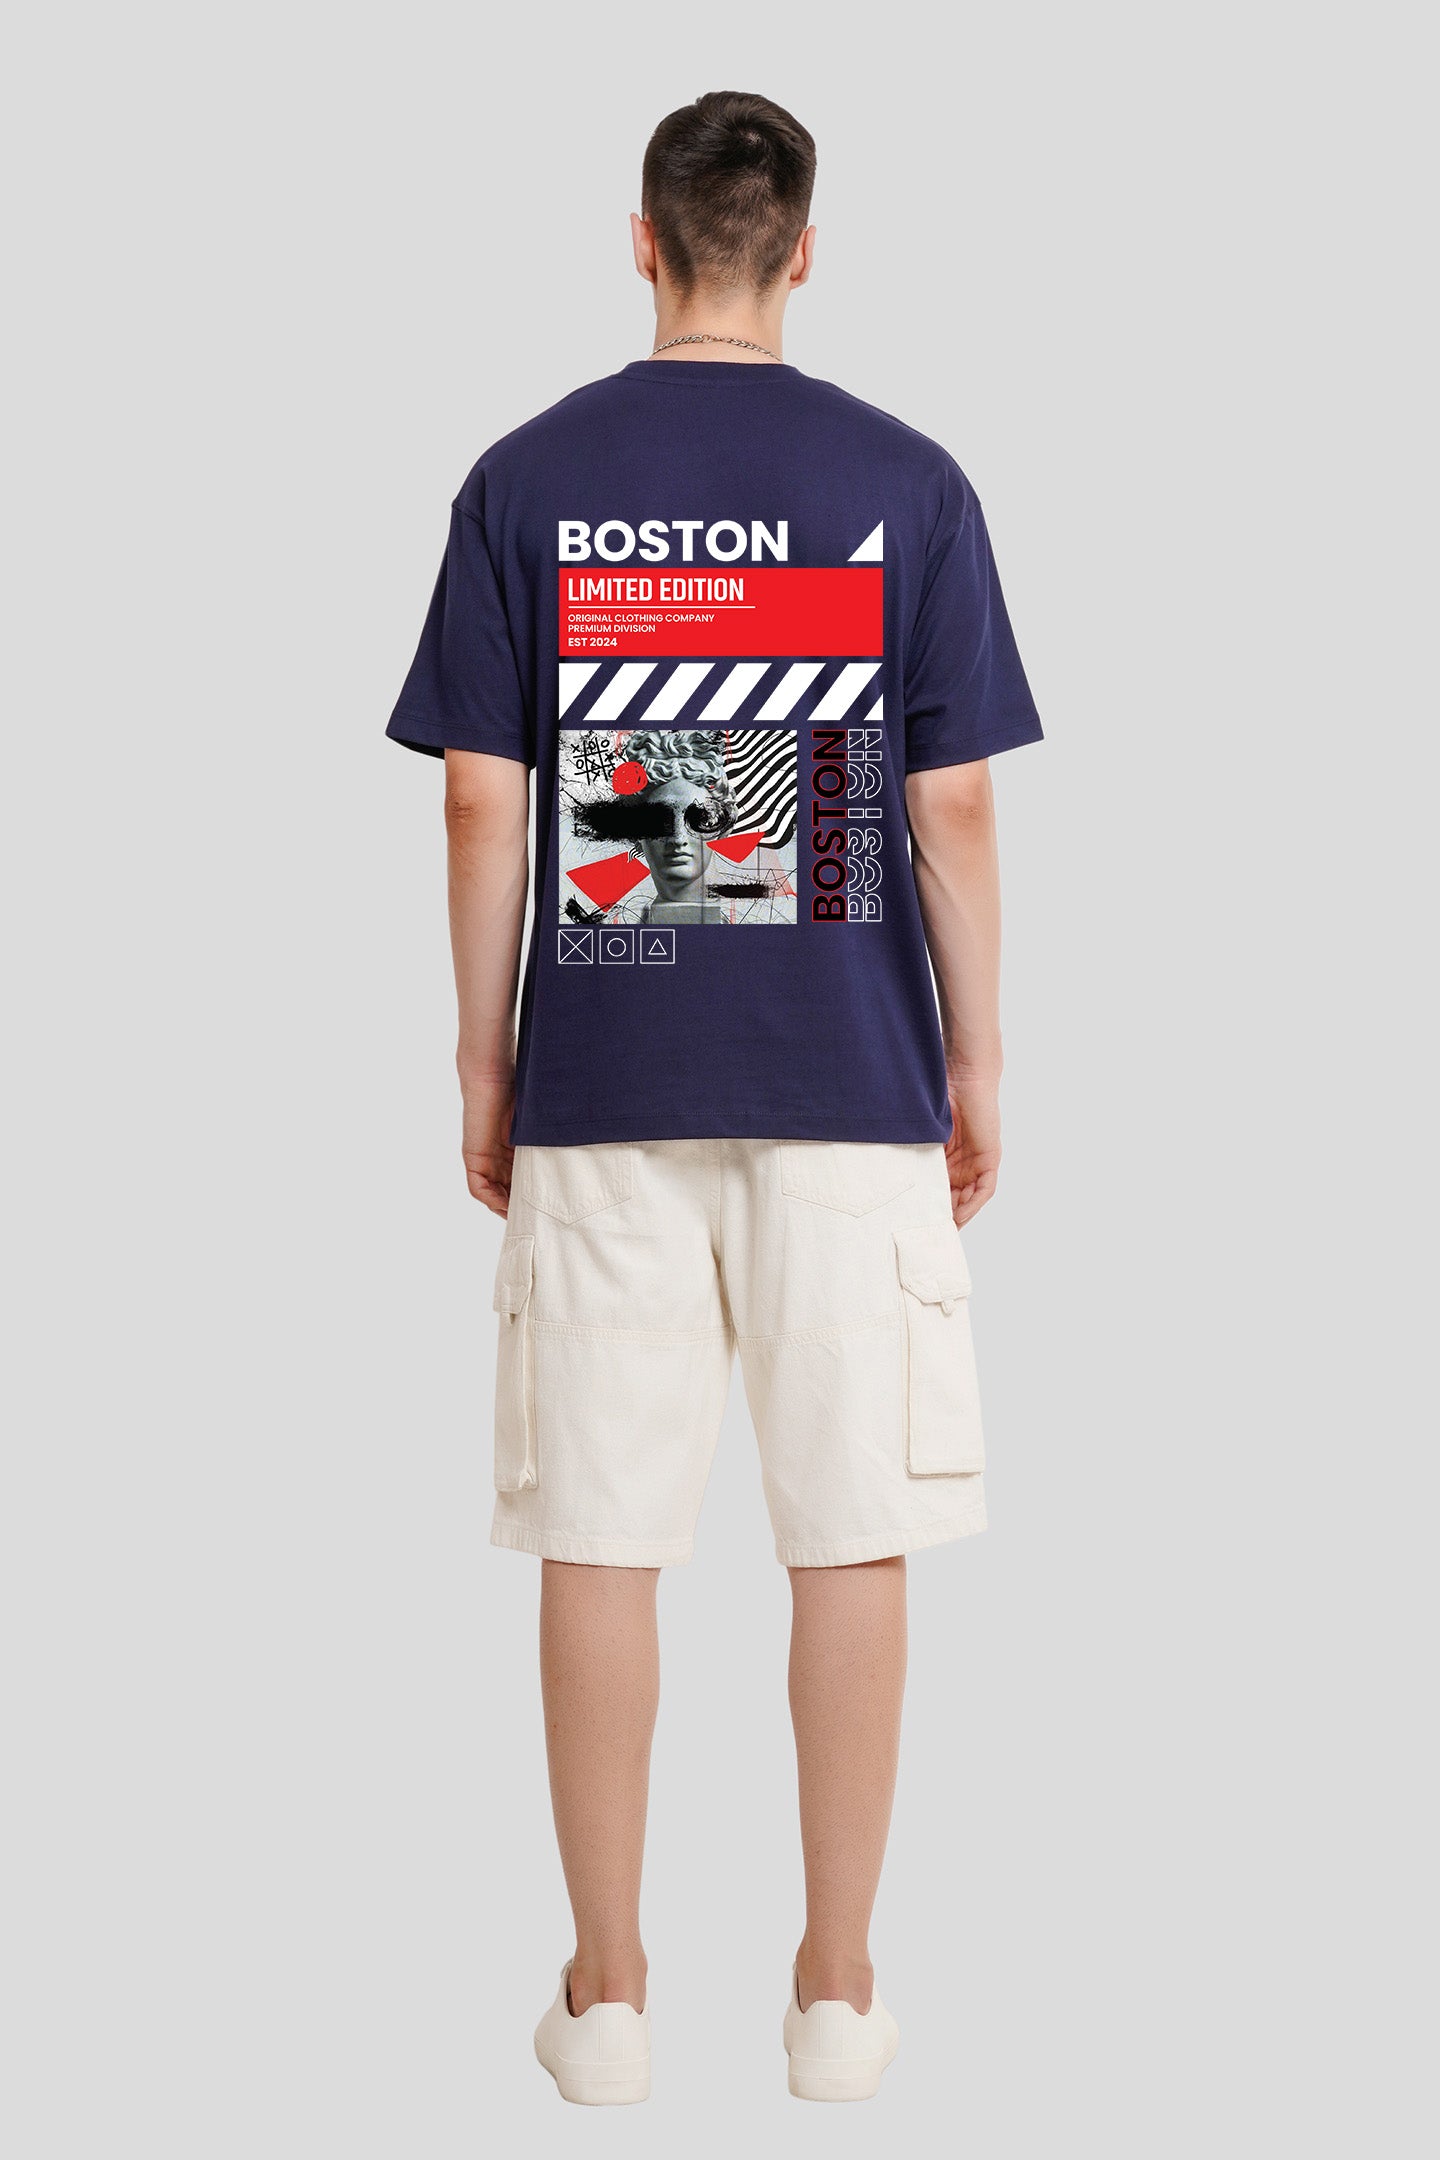 Boston Navy Blue Printed T Shirt Men Oversized Fit With Front And Back Design Pic 5